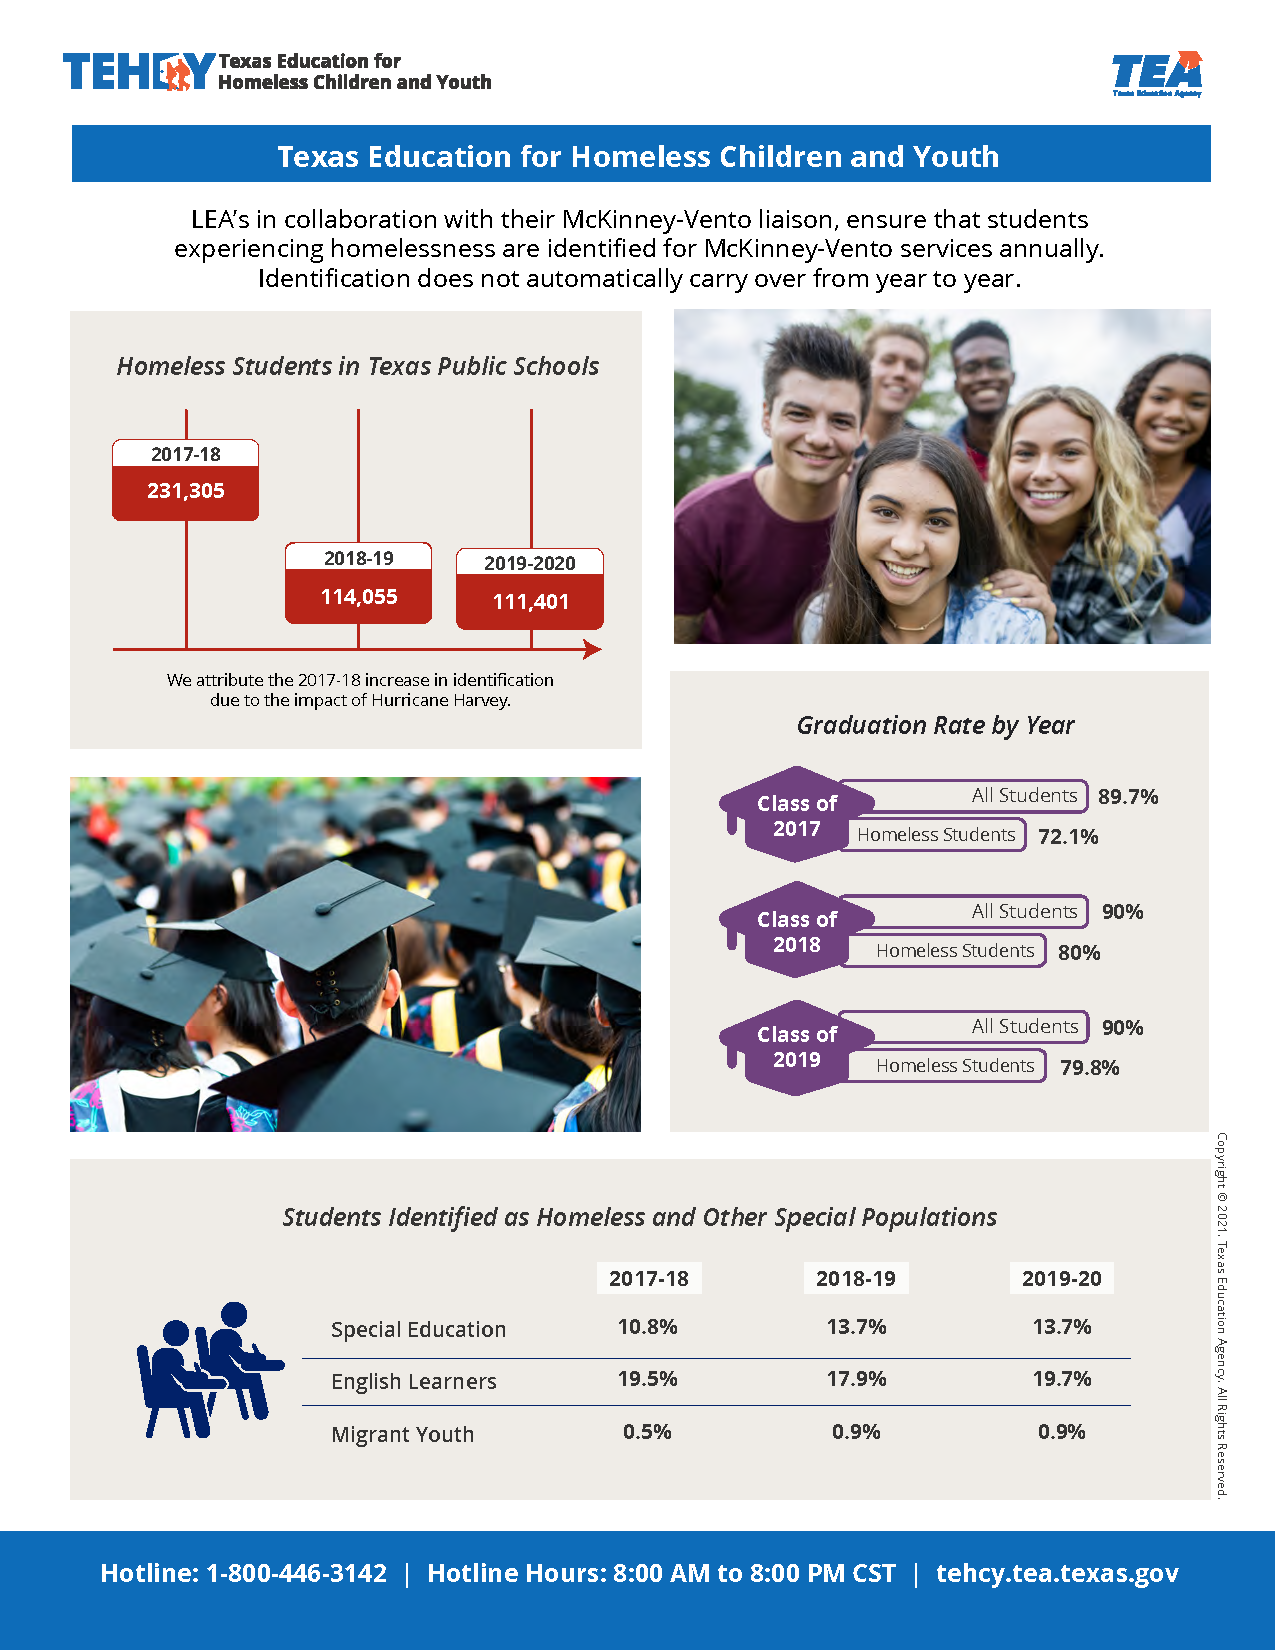 TEHCY Infographic 2018-2020 Texas Education for Homeless Children and Youth Data